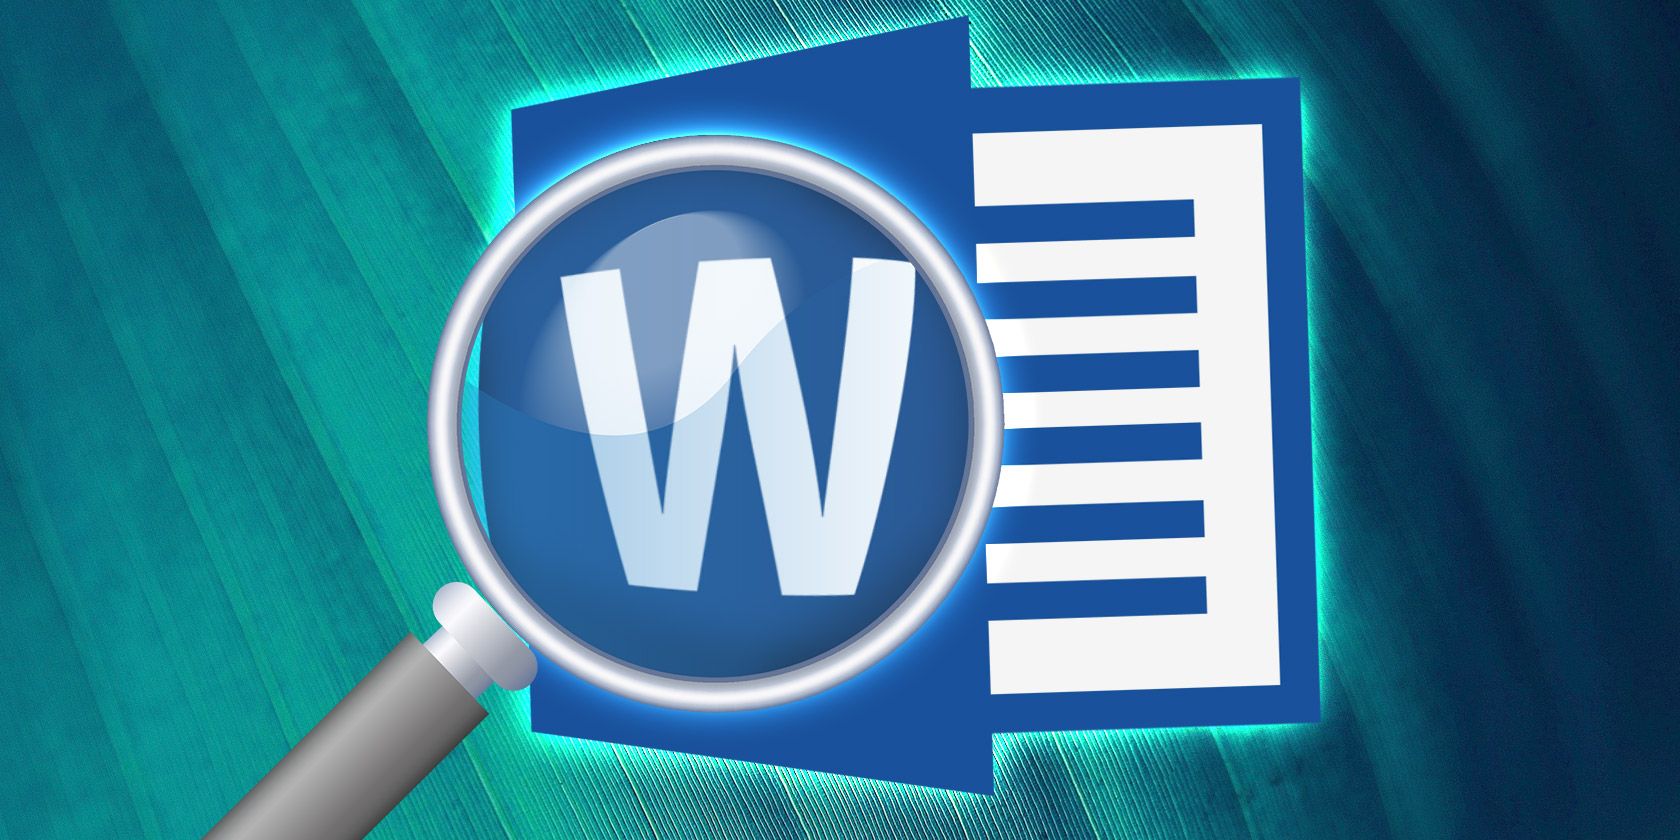 10 Hidden Features of Microsoft Word That'll Make Your Life Easier